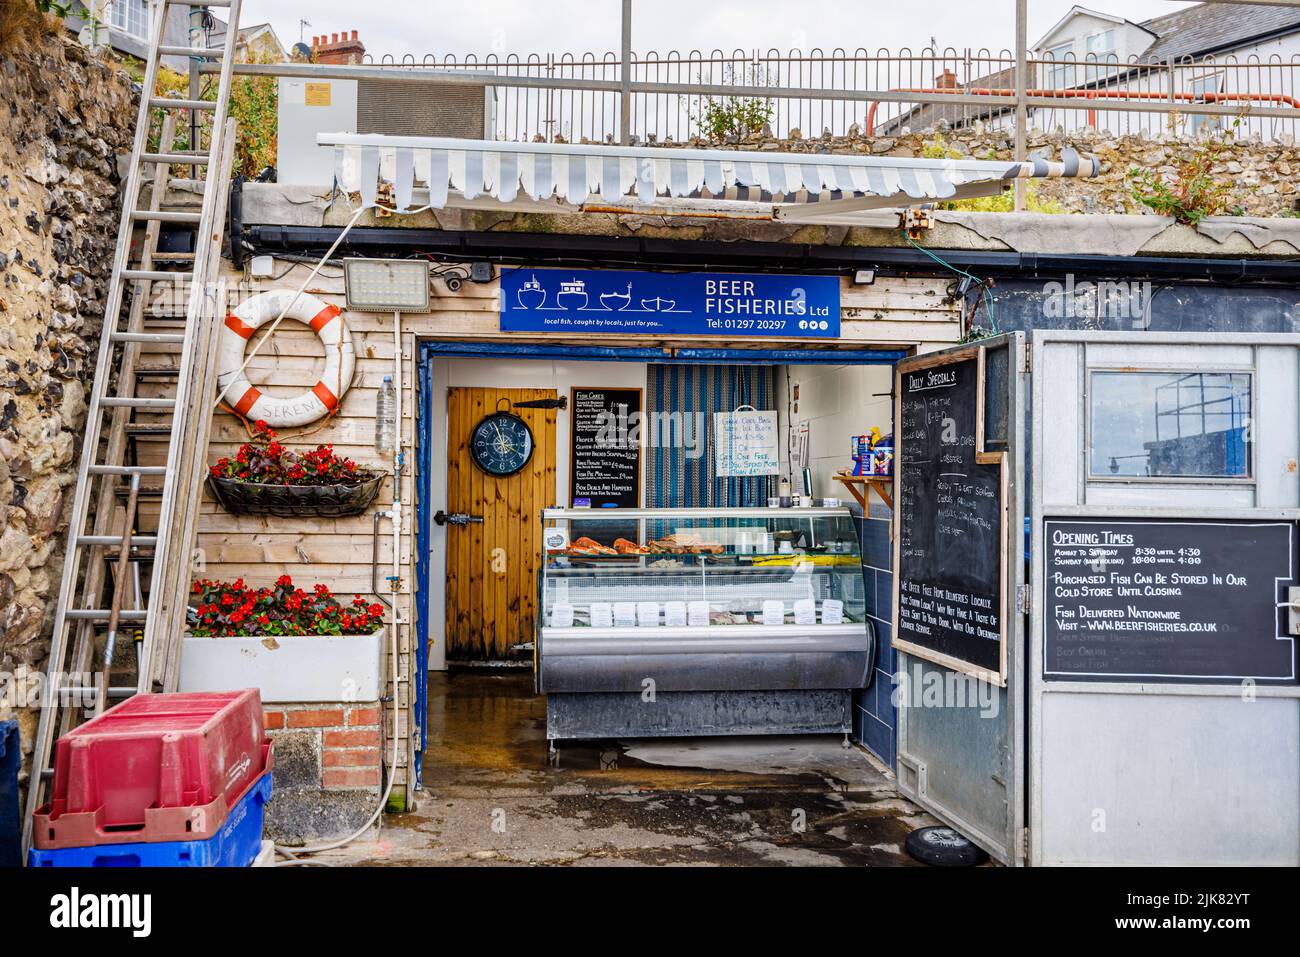 Beer Fisheries shop selling fresh fish by the beach in Beer, a small coastal village on Lyme Bay in the Jurassic Coast, East Dorset, southwest England Stock Photo